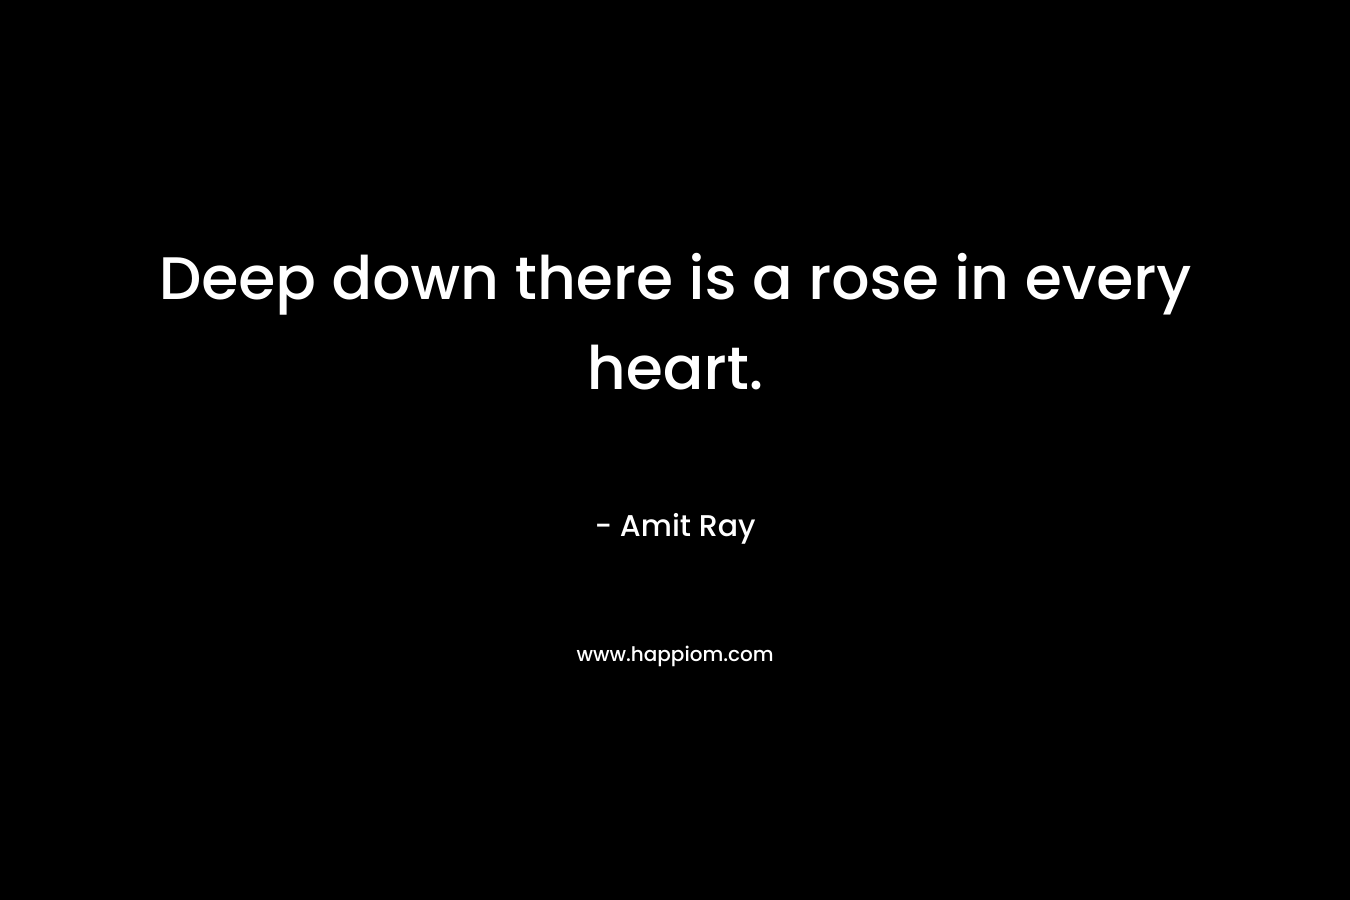 Deep down there is a rose in every heart.